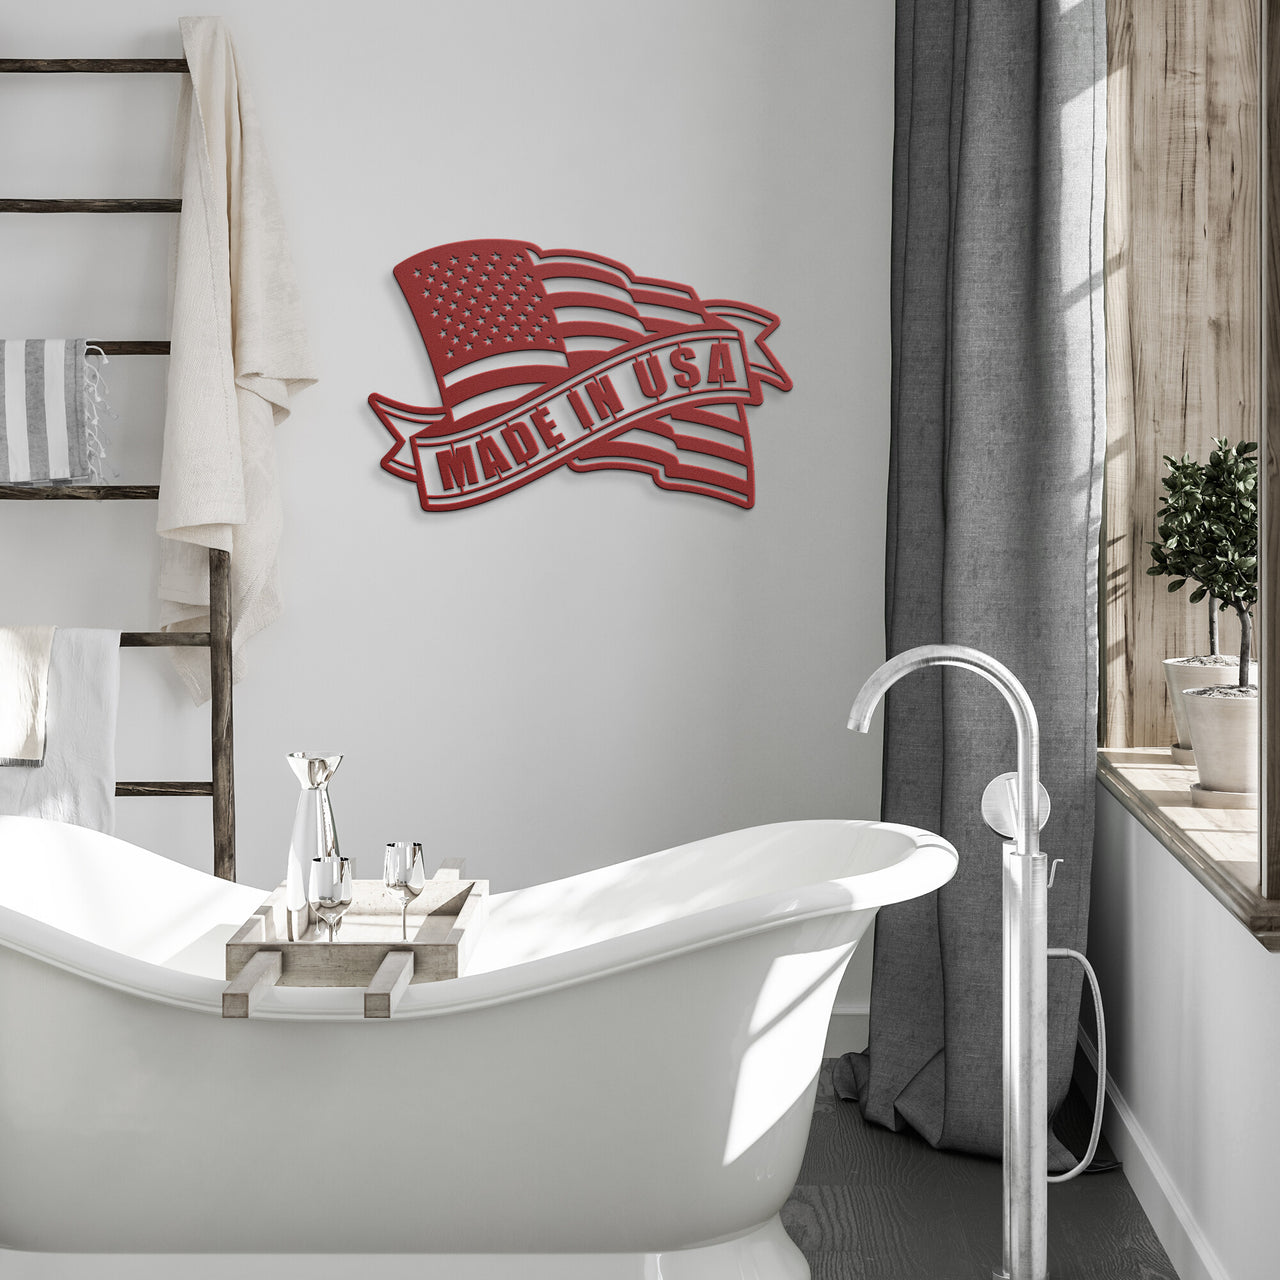 Bath Room, Wall Art of Flag with banner, Made in USA. Made of steel and powder coated.